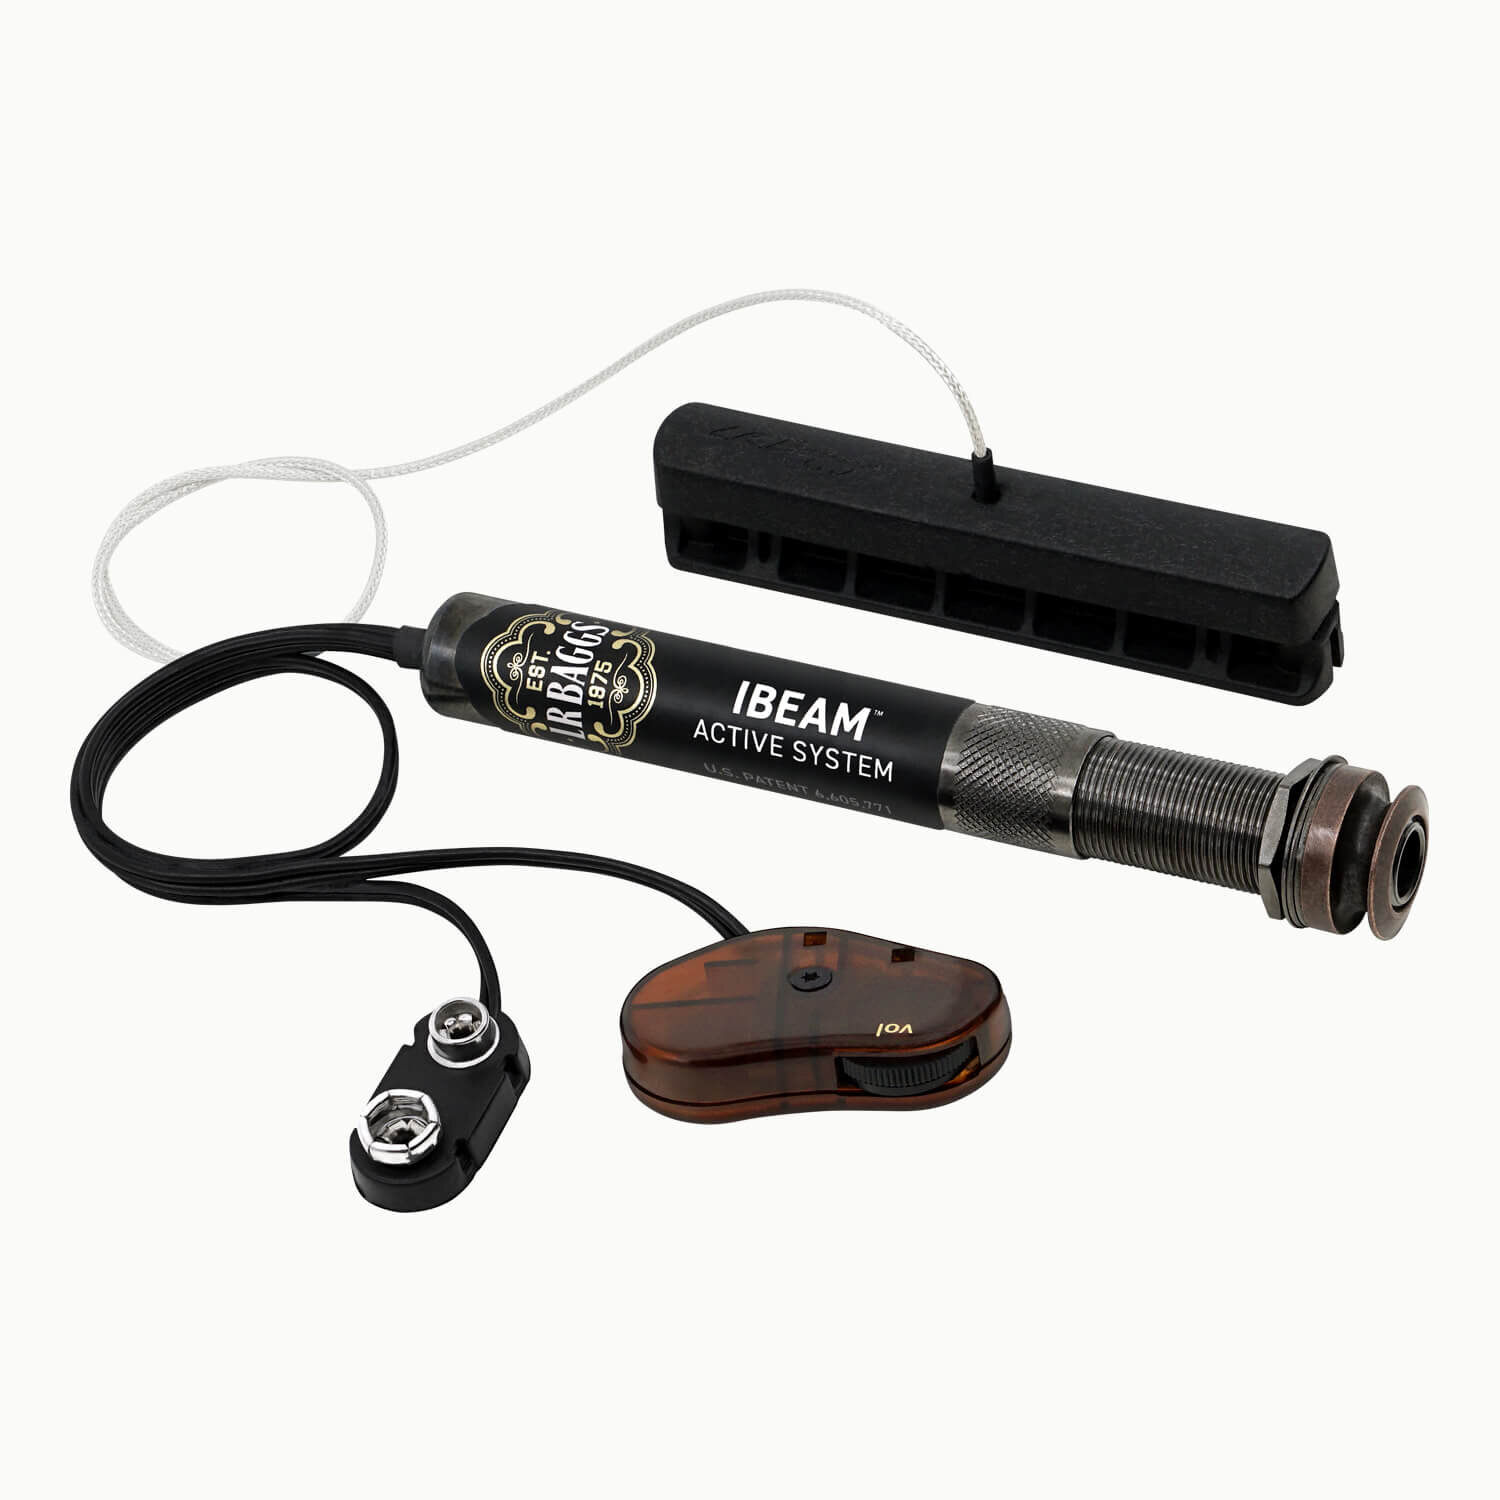 LR Baggs iBEAM active systemピックアップ-